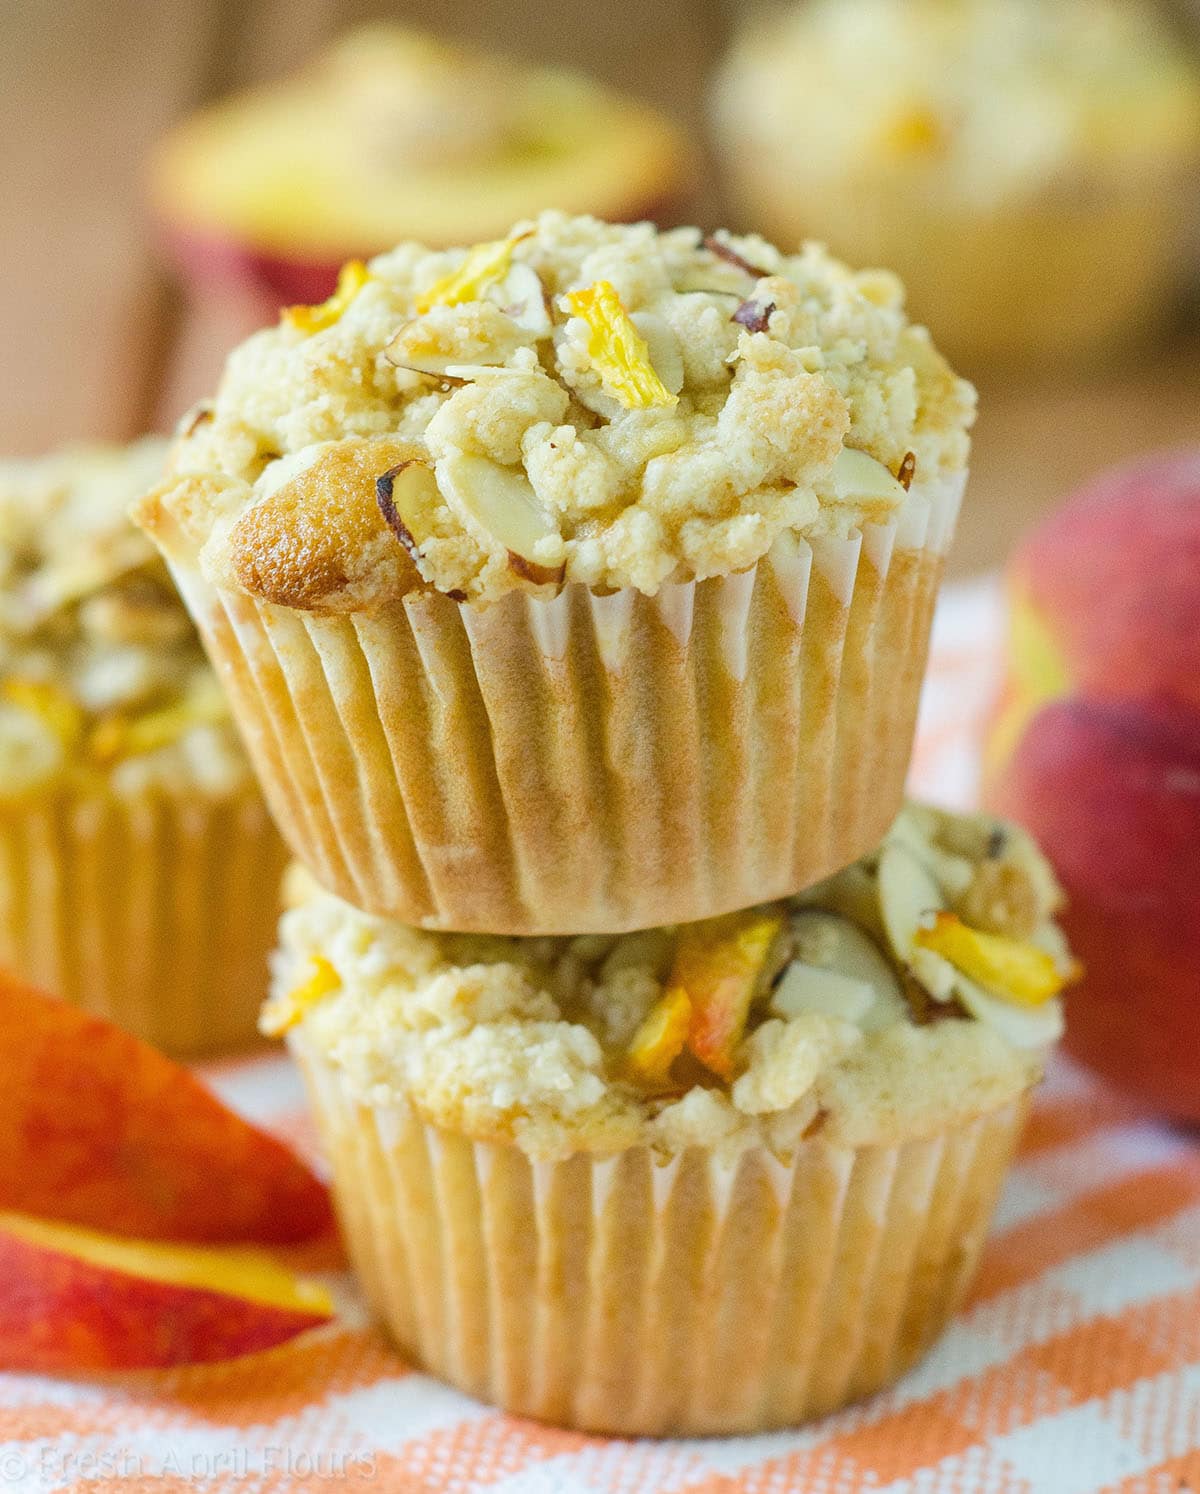 Moist and tender peach muffins, accented with almond extract and topped with a sweet and crunchy almond streusel. via @frshaprilflours